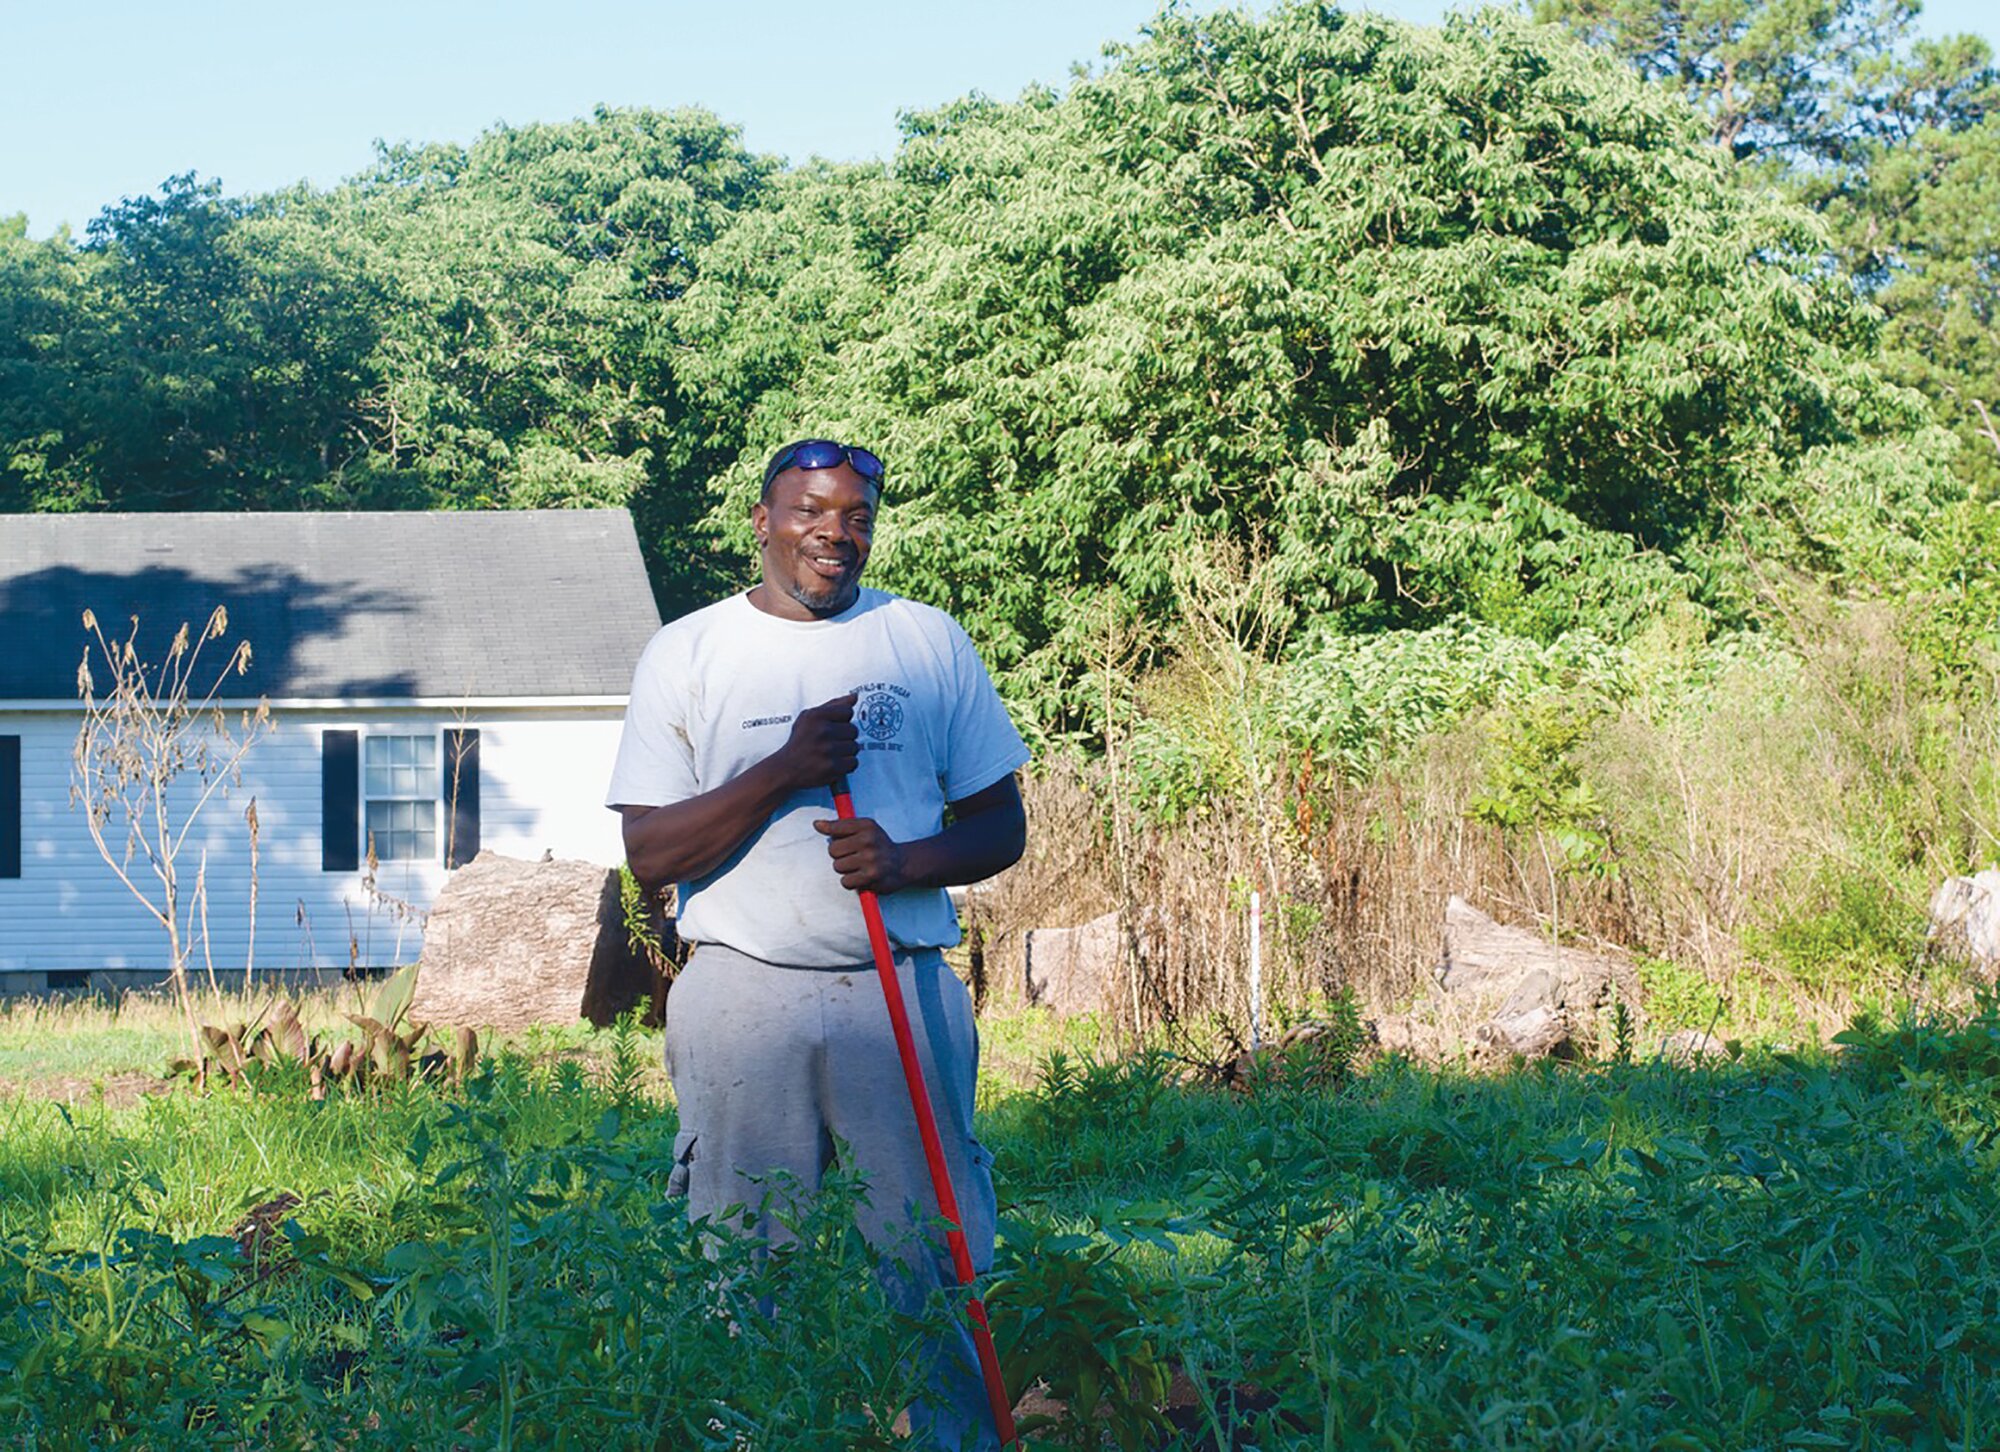 Kawan Glover is the owner of Rembert's Farmers Market, and after recently starting a community garden on the market's property, he is looking for some help from his community. Glover needs any garden-related donations, from cages for his tomatoes to a used tractor.